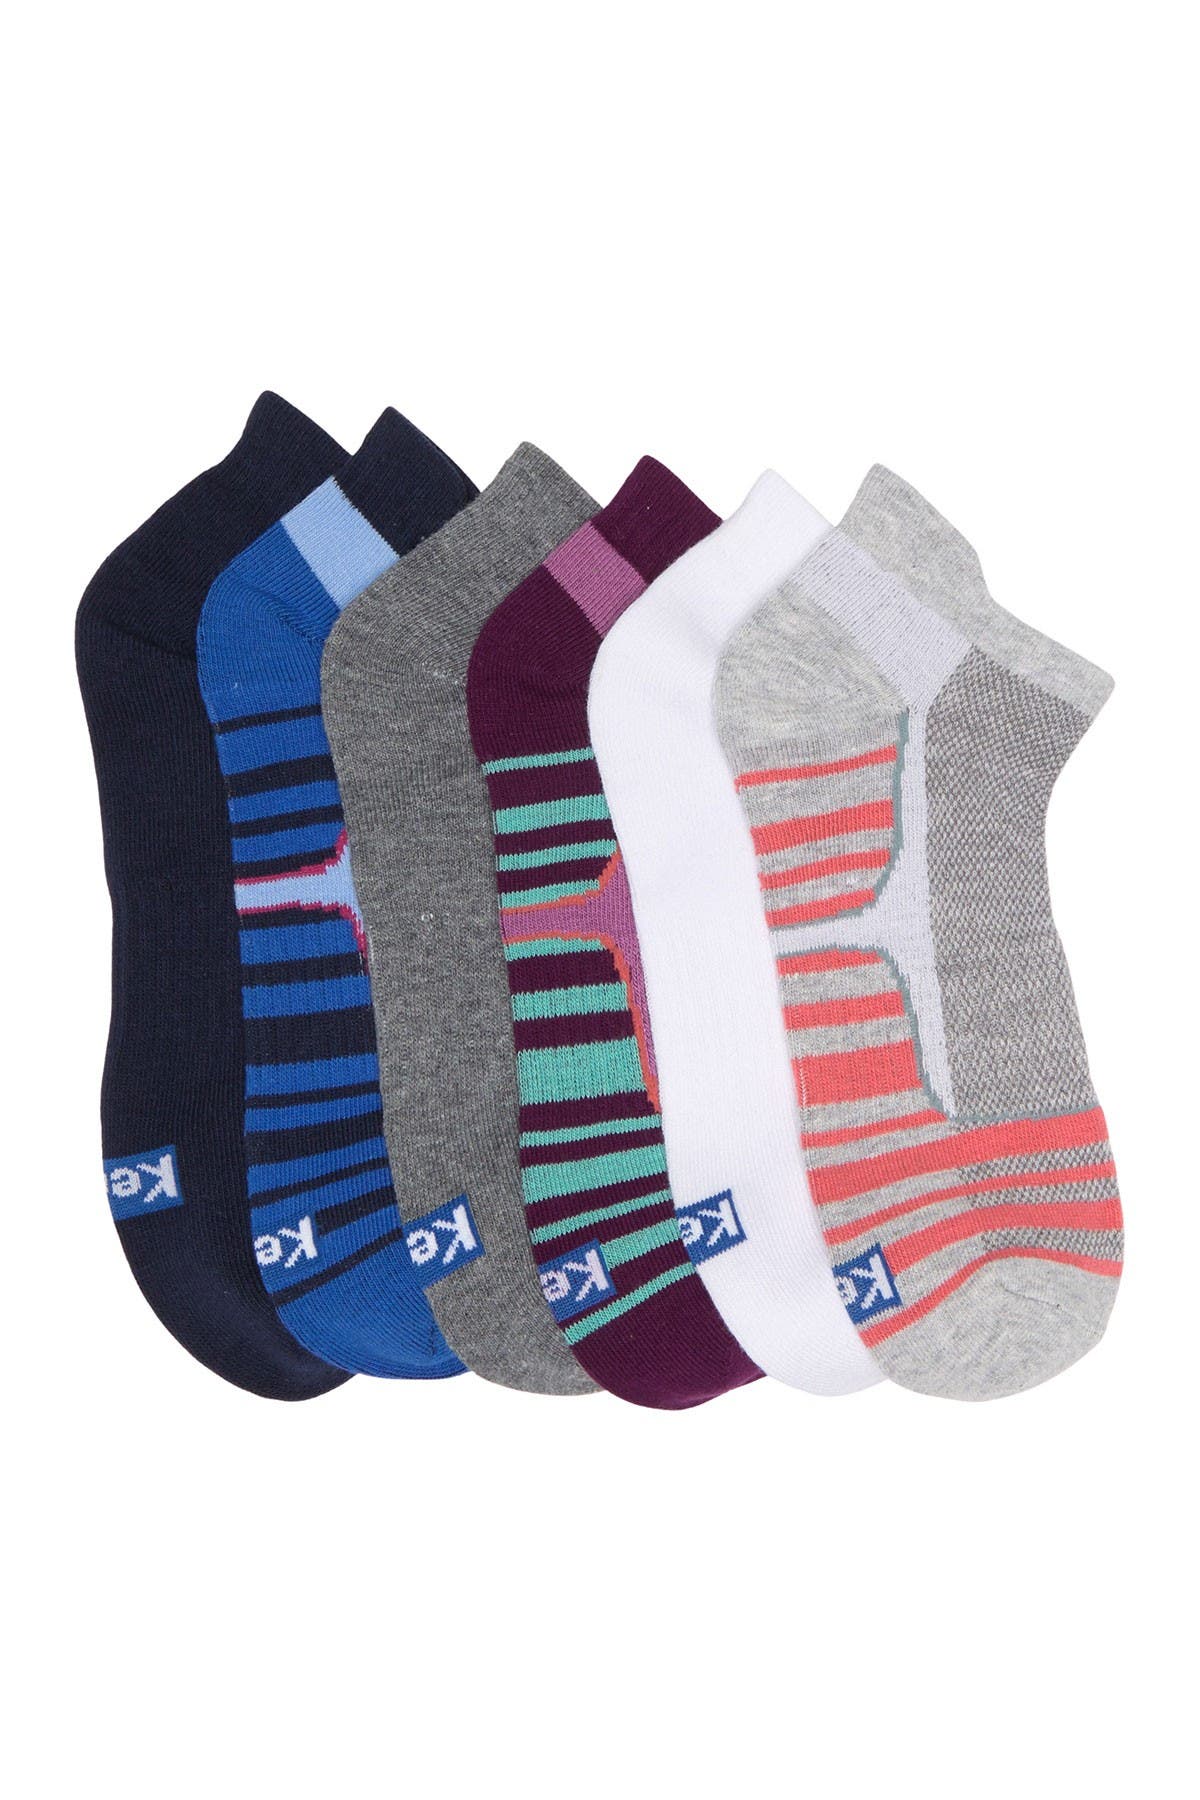 Keds | Assorted Low Cut Ankle Socks 